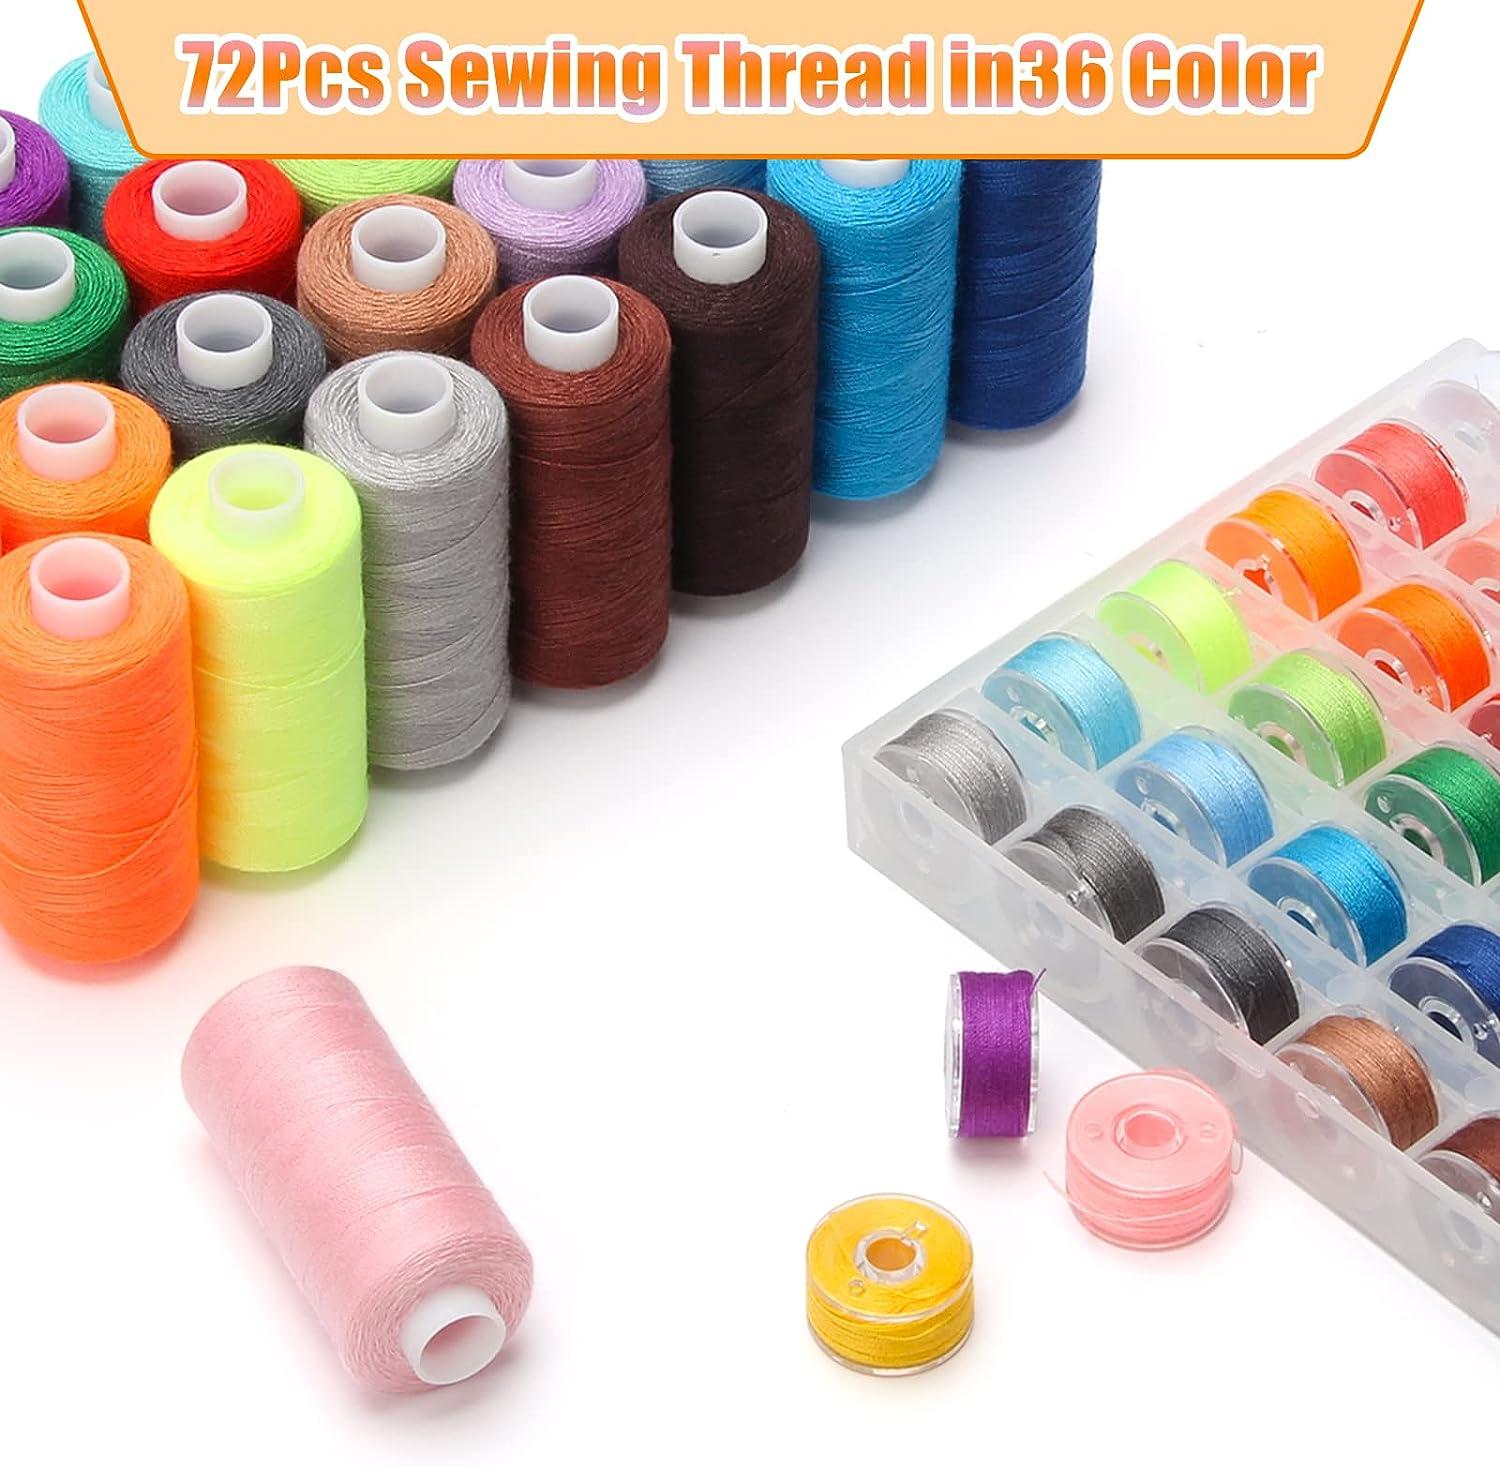  72Pcs 36 Colors Sewing Thread Set with Matching